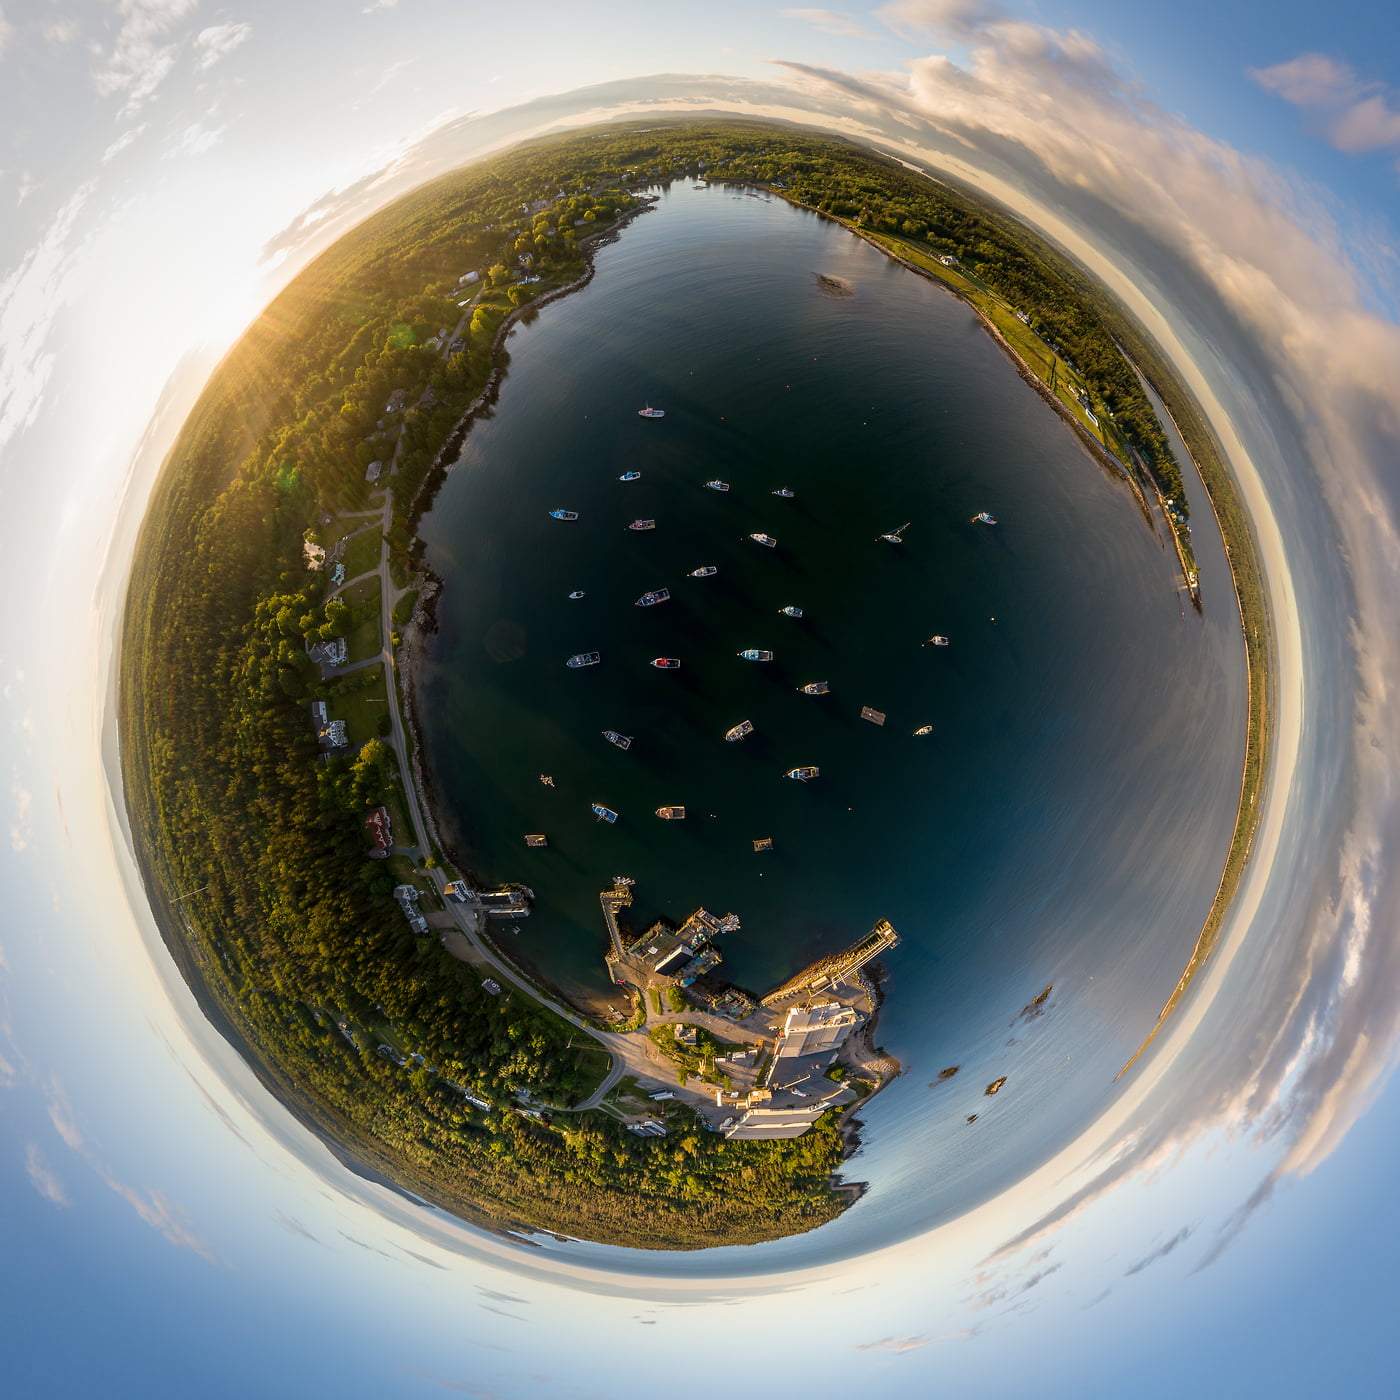 133 megapixels! A very high resolution, large-format artistic 360-degree spherical photo of a New England harbor with boats at sunset; abstract fine art photograph created by Aaron Priest in Prospect Harbor, Maine.